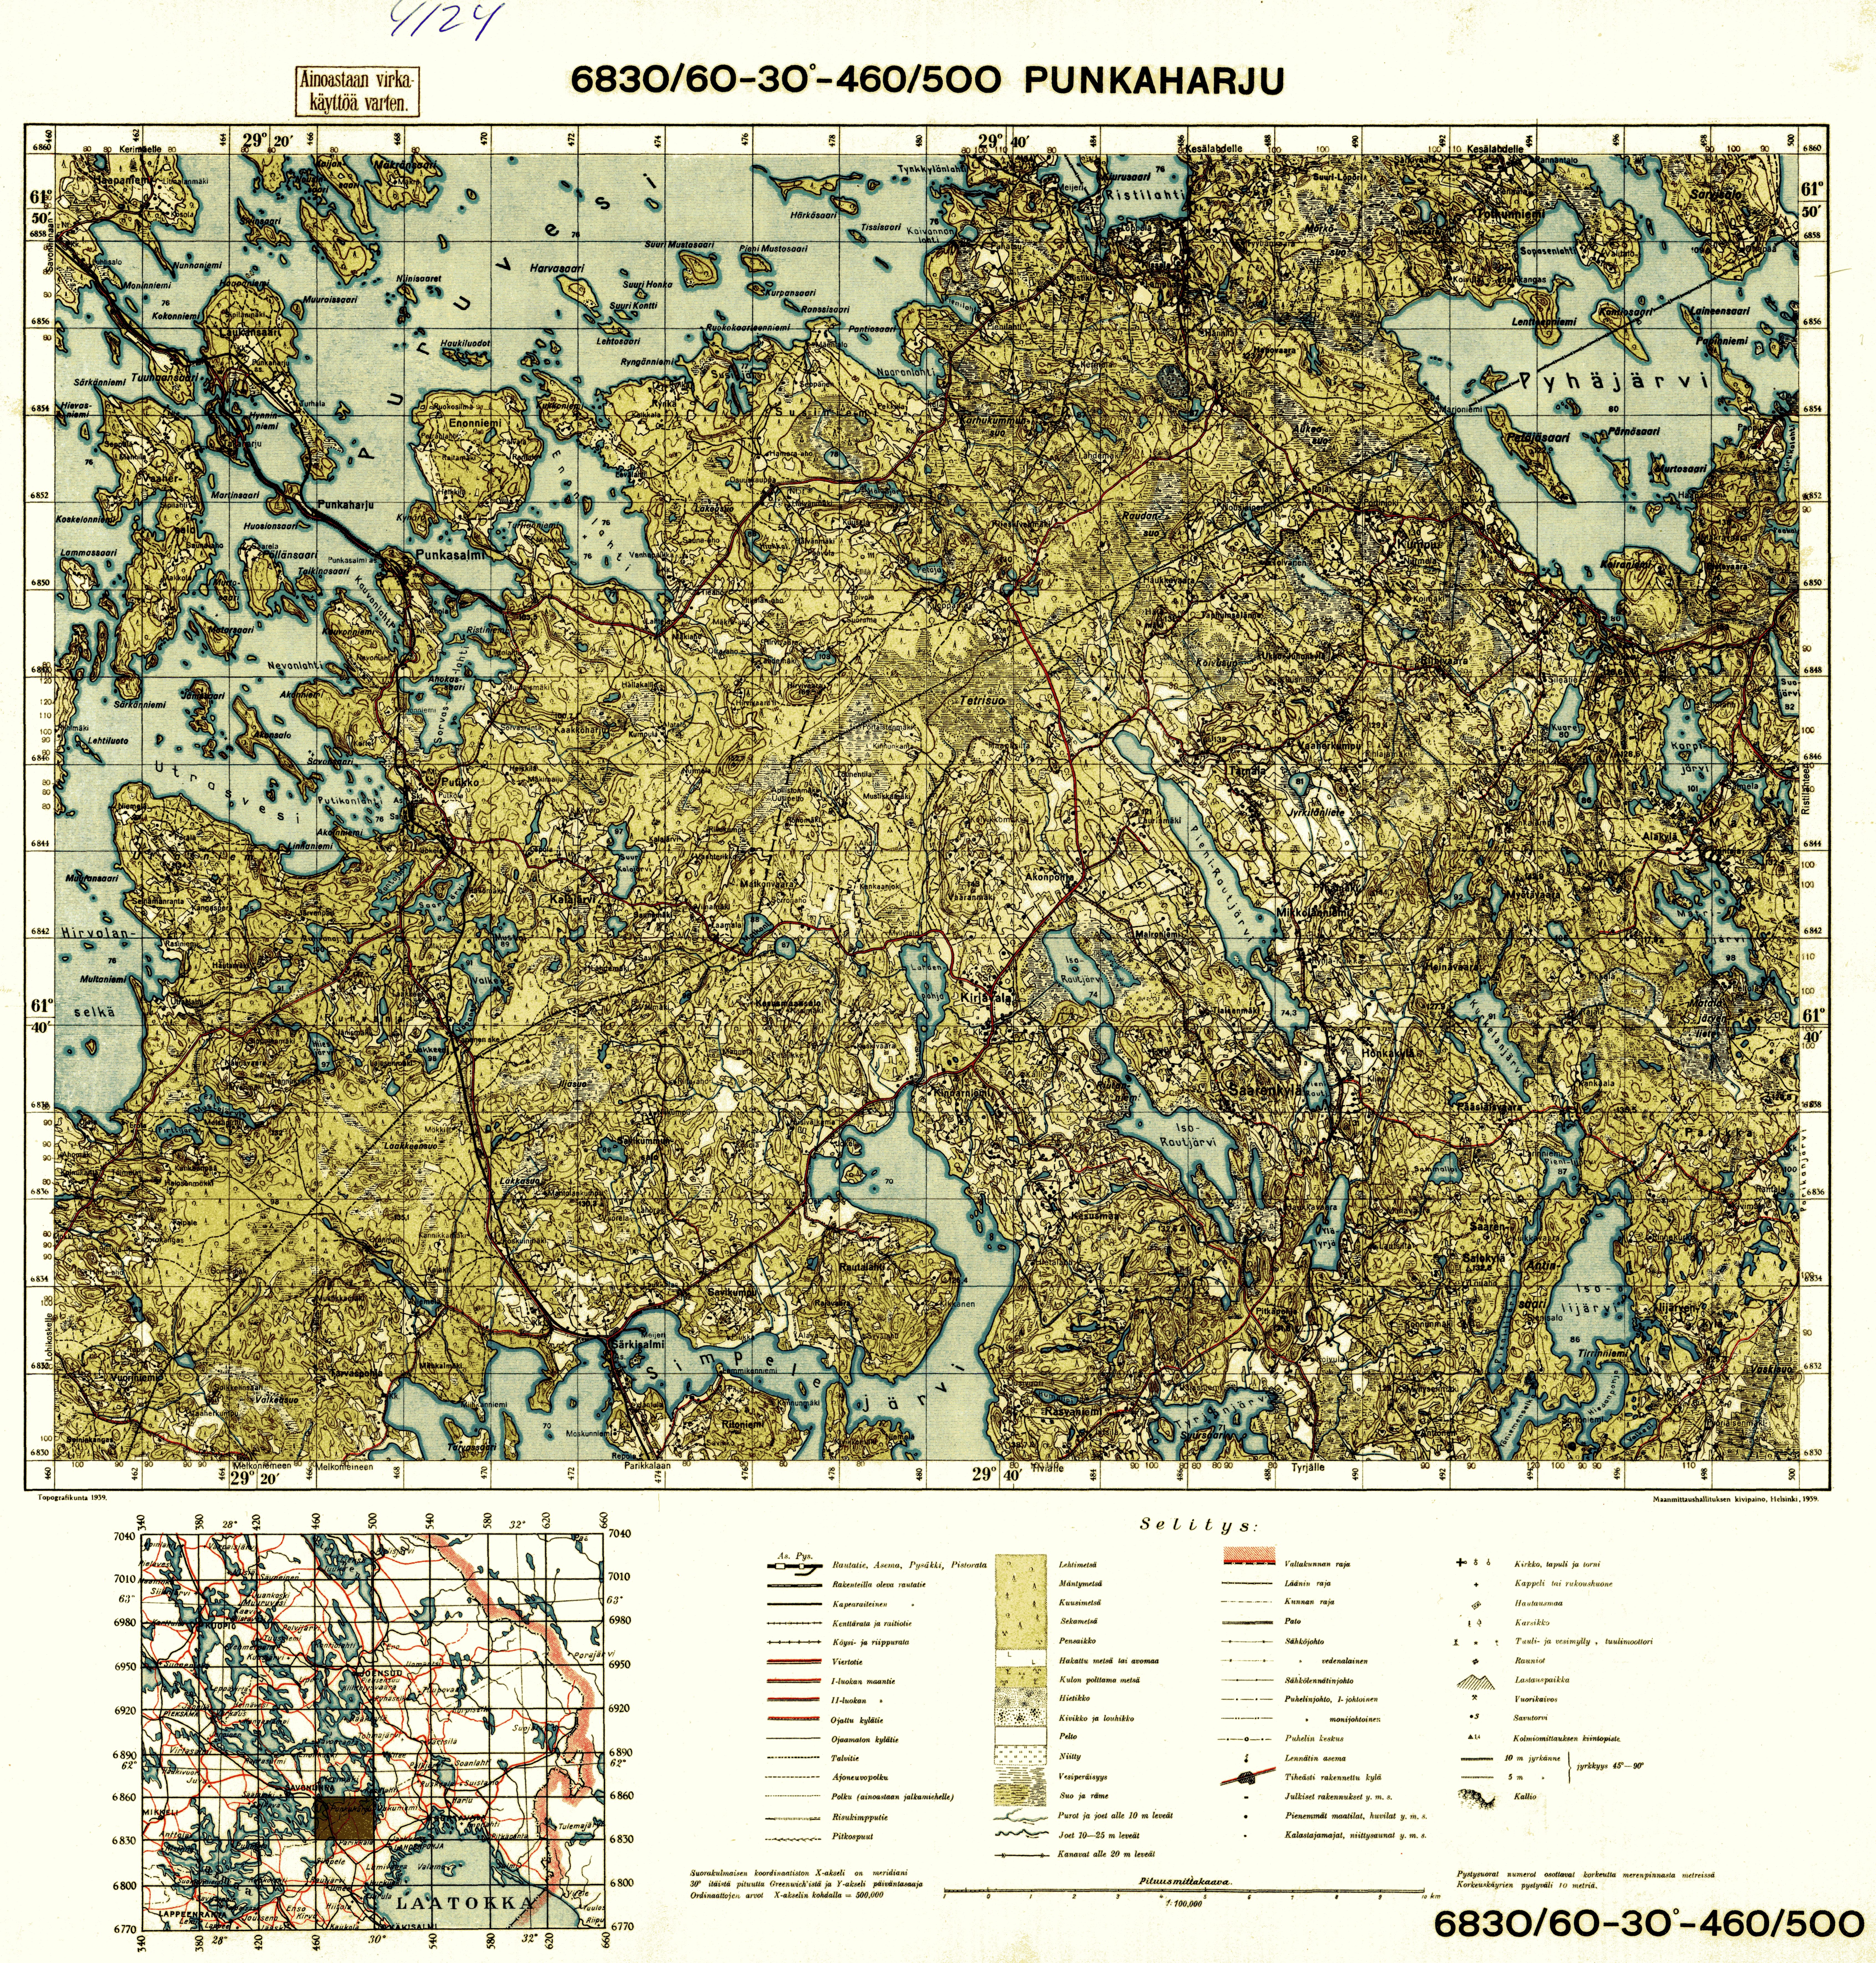 Punkaharju. Topografikartta 4124. Topographic map from 1939. Use the zooming tool to explore in higher level of detail. Obtain as a quality print or high resolution image